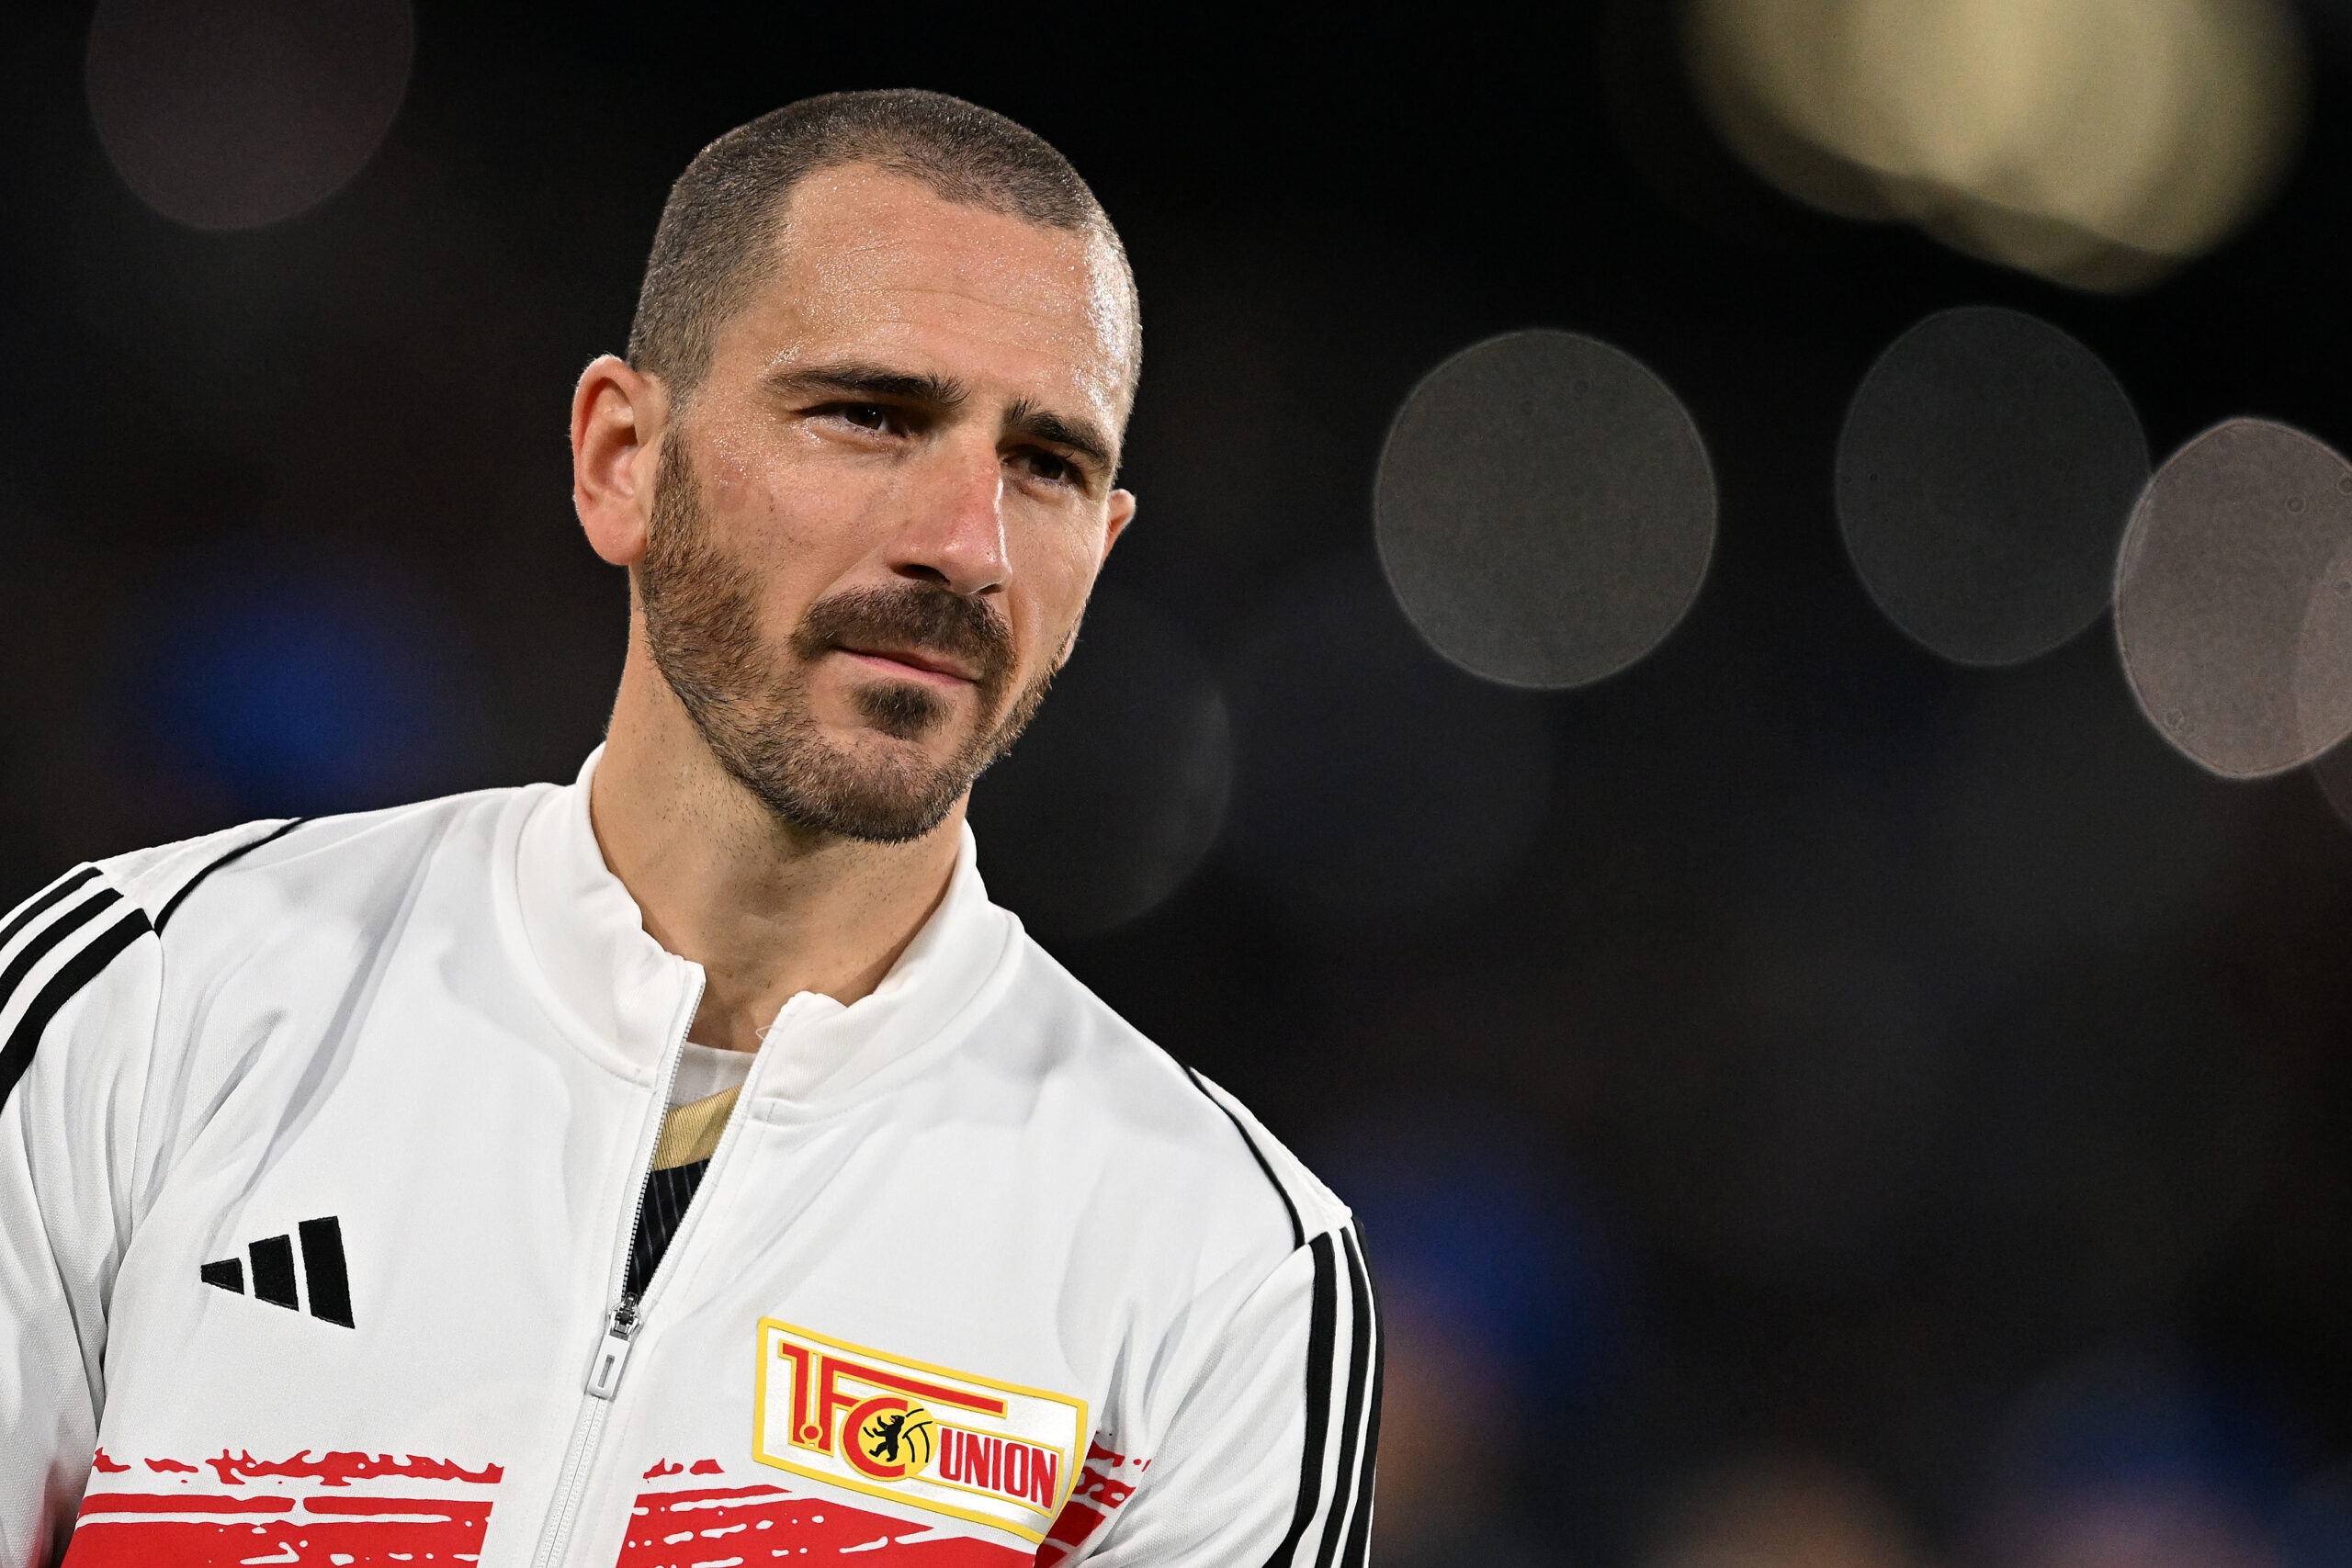 Leonardo Bonucci won’t be coming back to Italy but he will indeed transfer in January, as Fenerbahce have come to terms with him and Union Berlin.